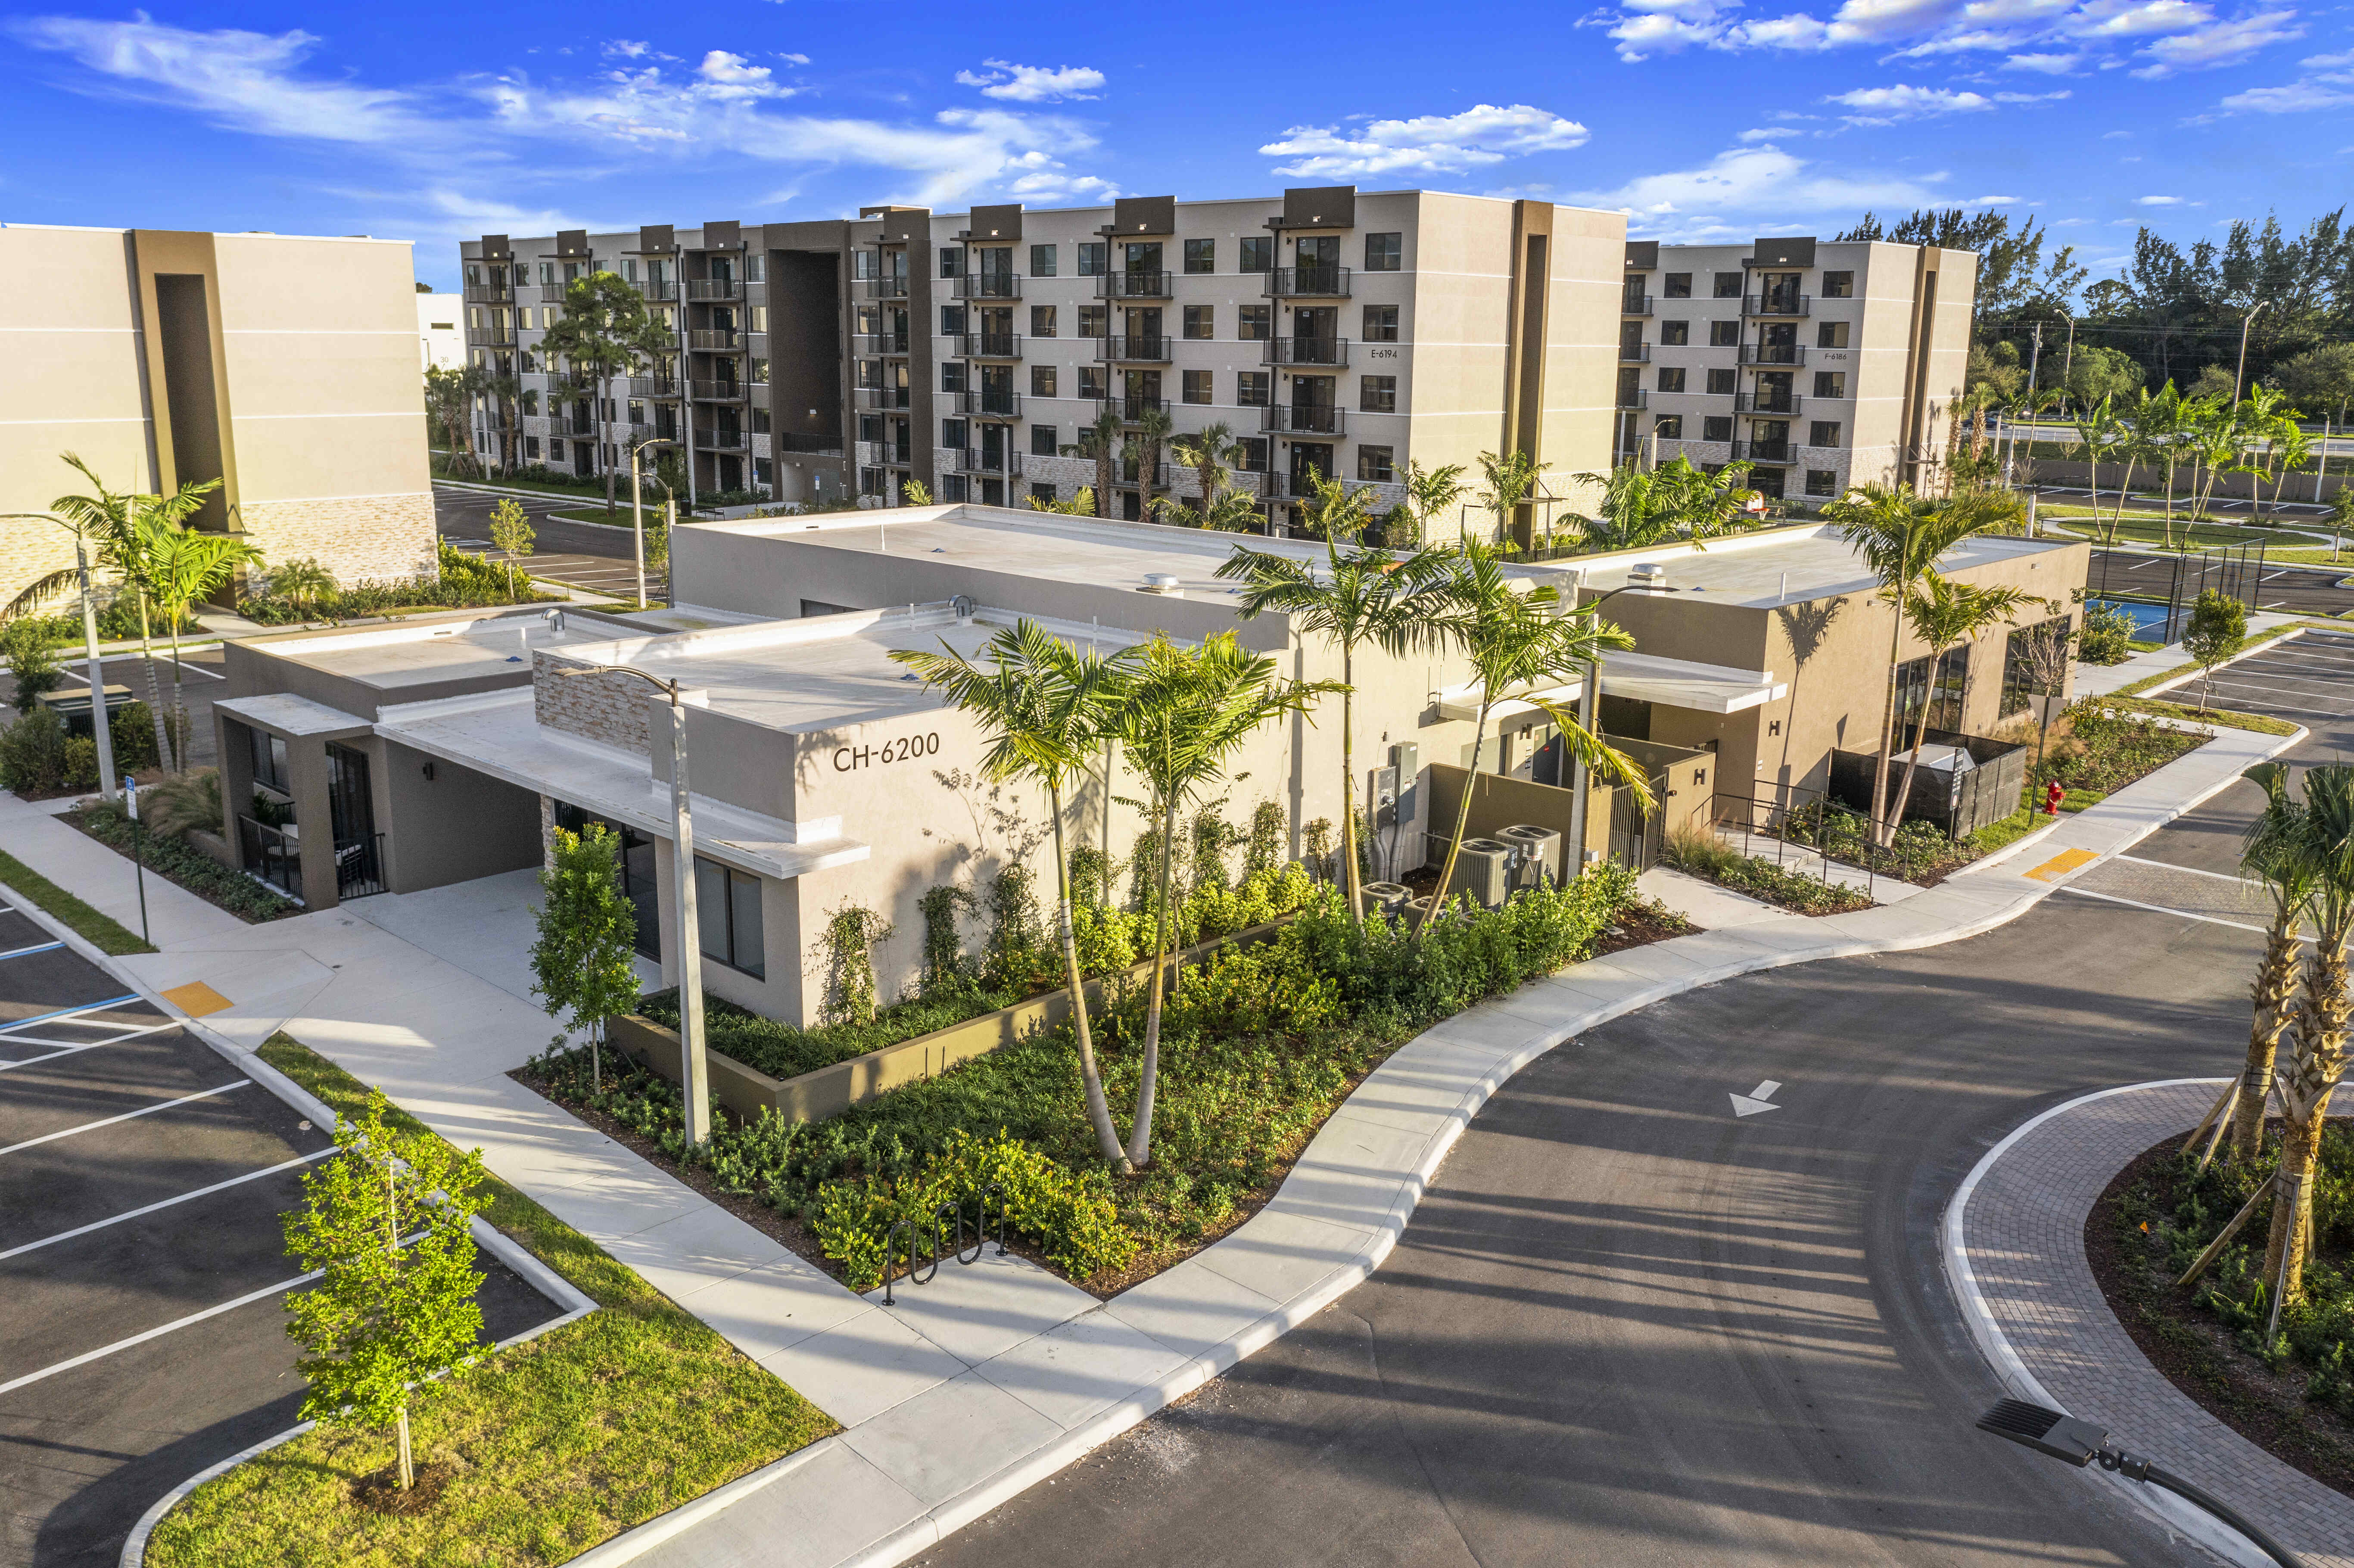 Arial view of the apartments at Pine Ridge in West Palm Beach, Florida